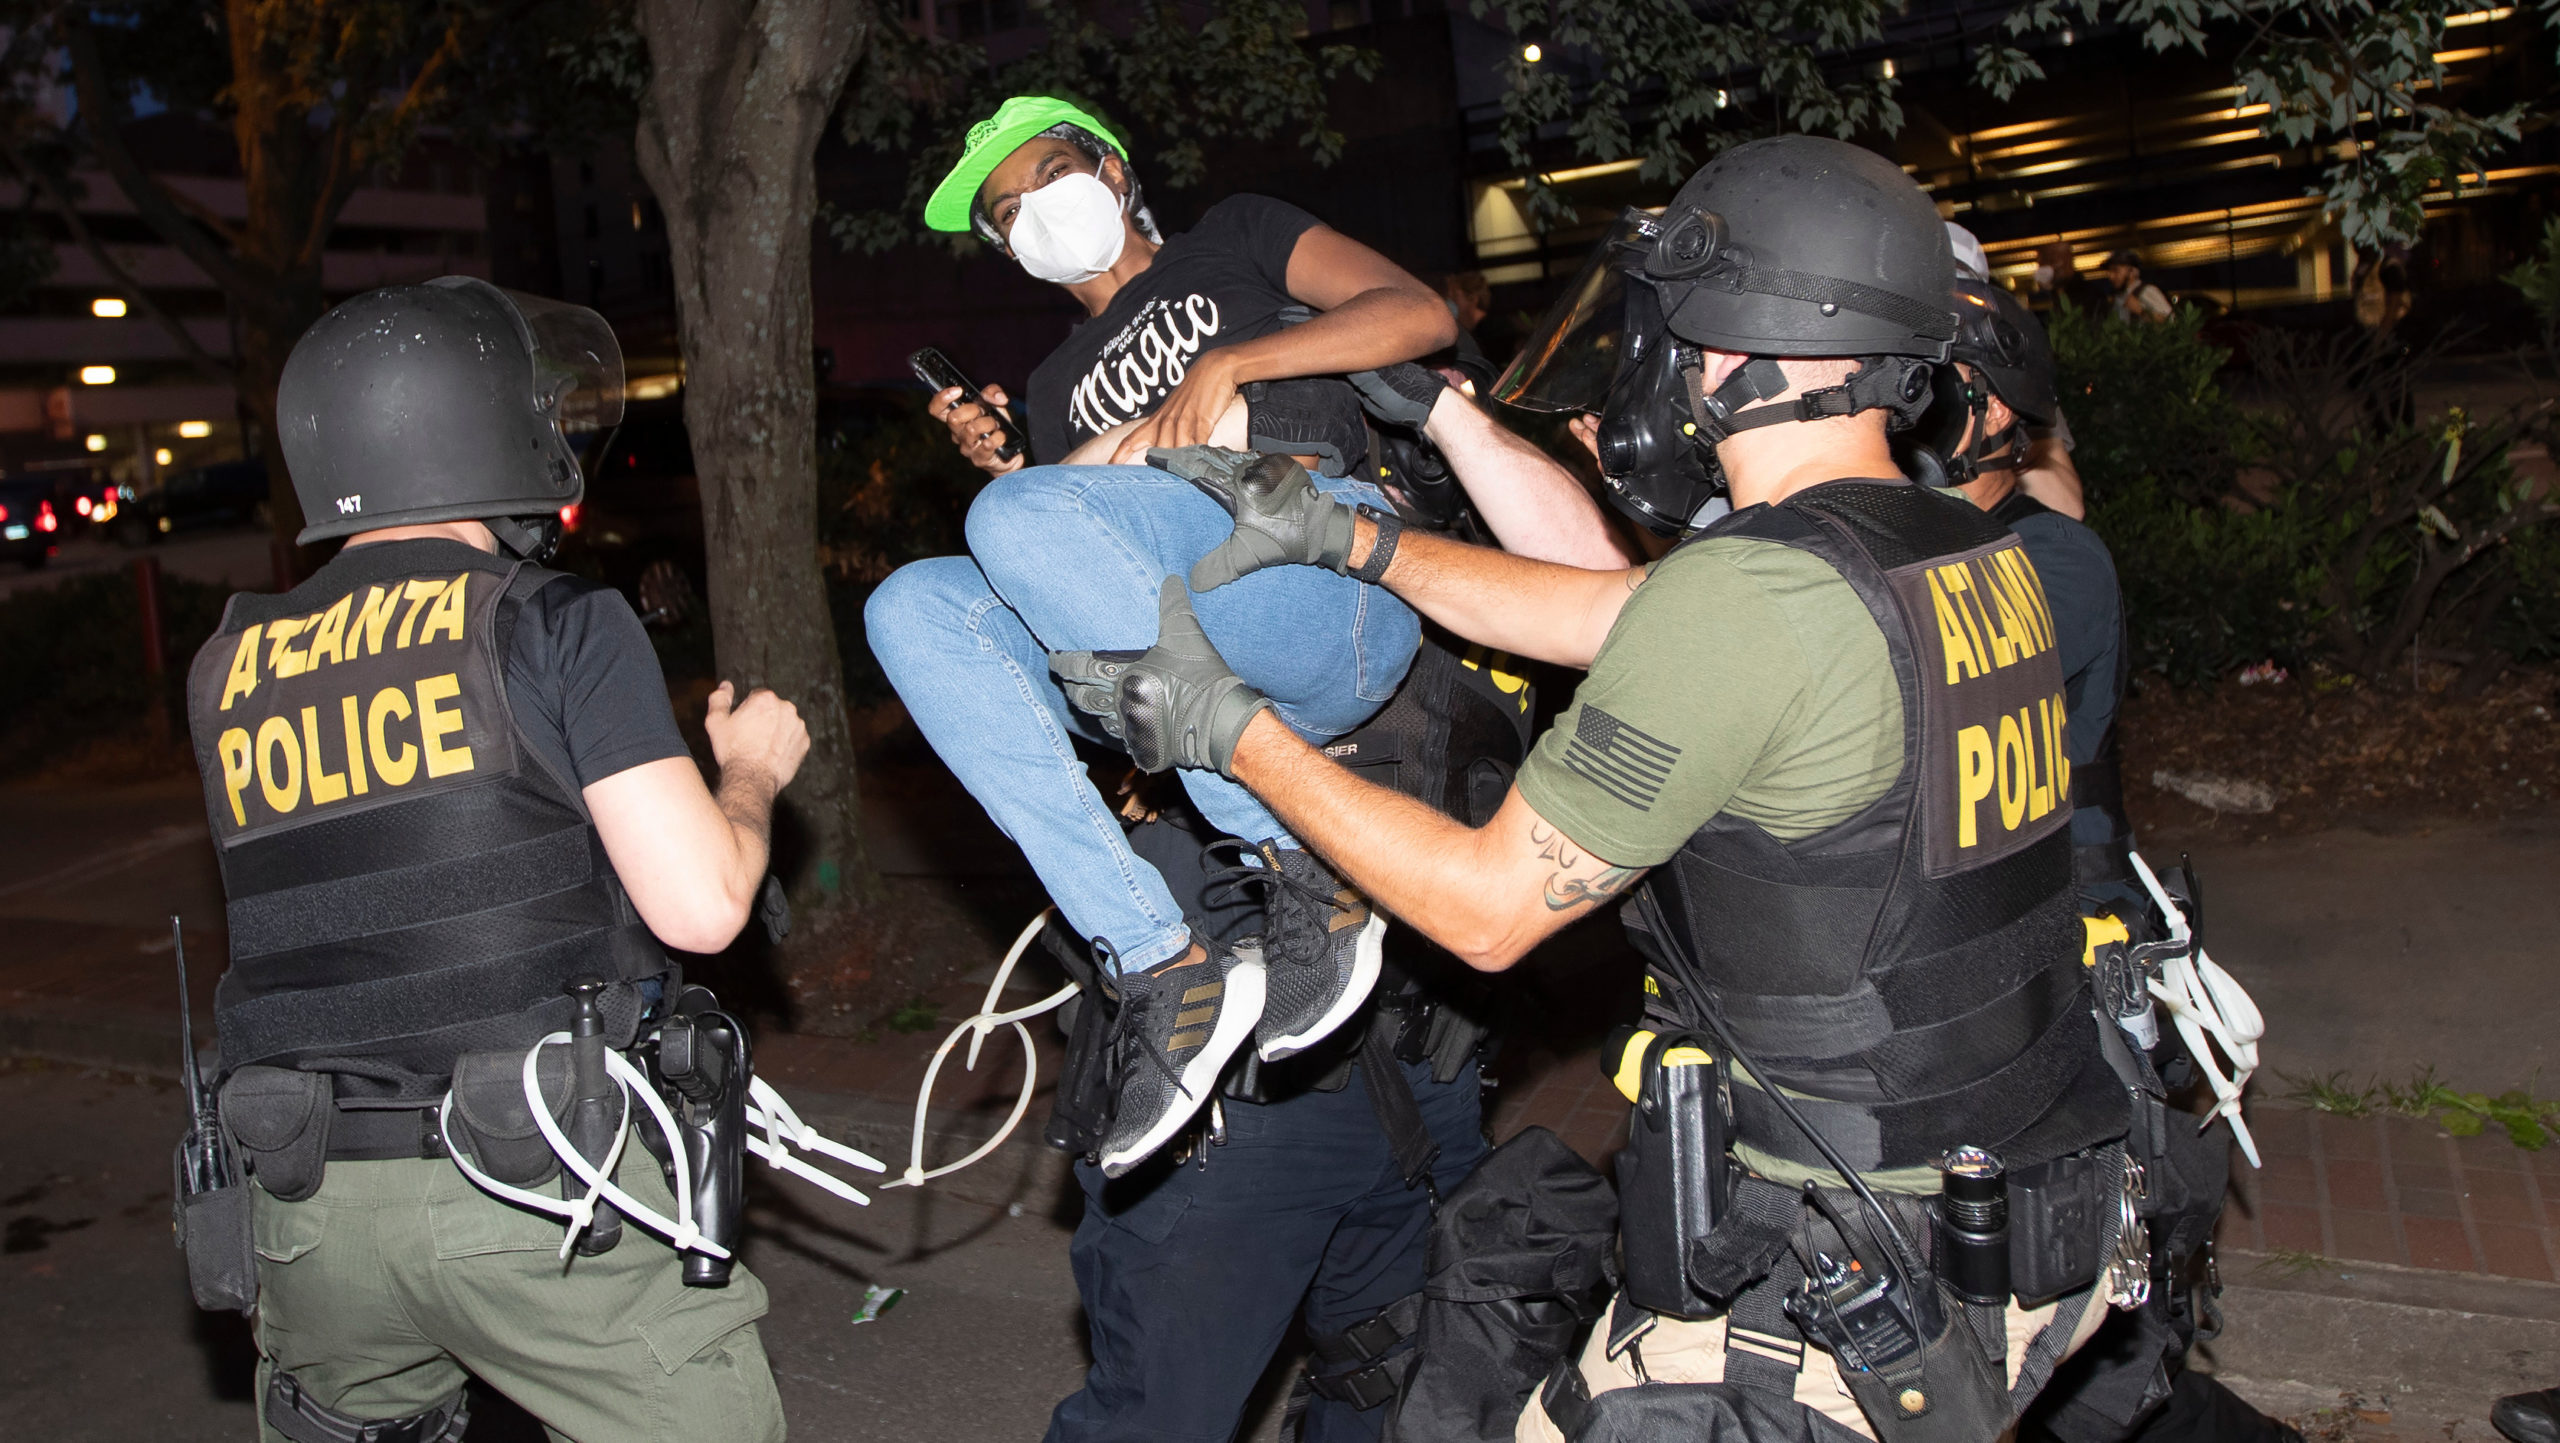 A protester being arrested by police in Atlanta, Georgia on June 1. (Photo: John Bazemore, AP)